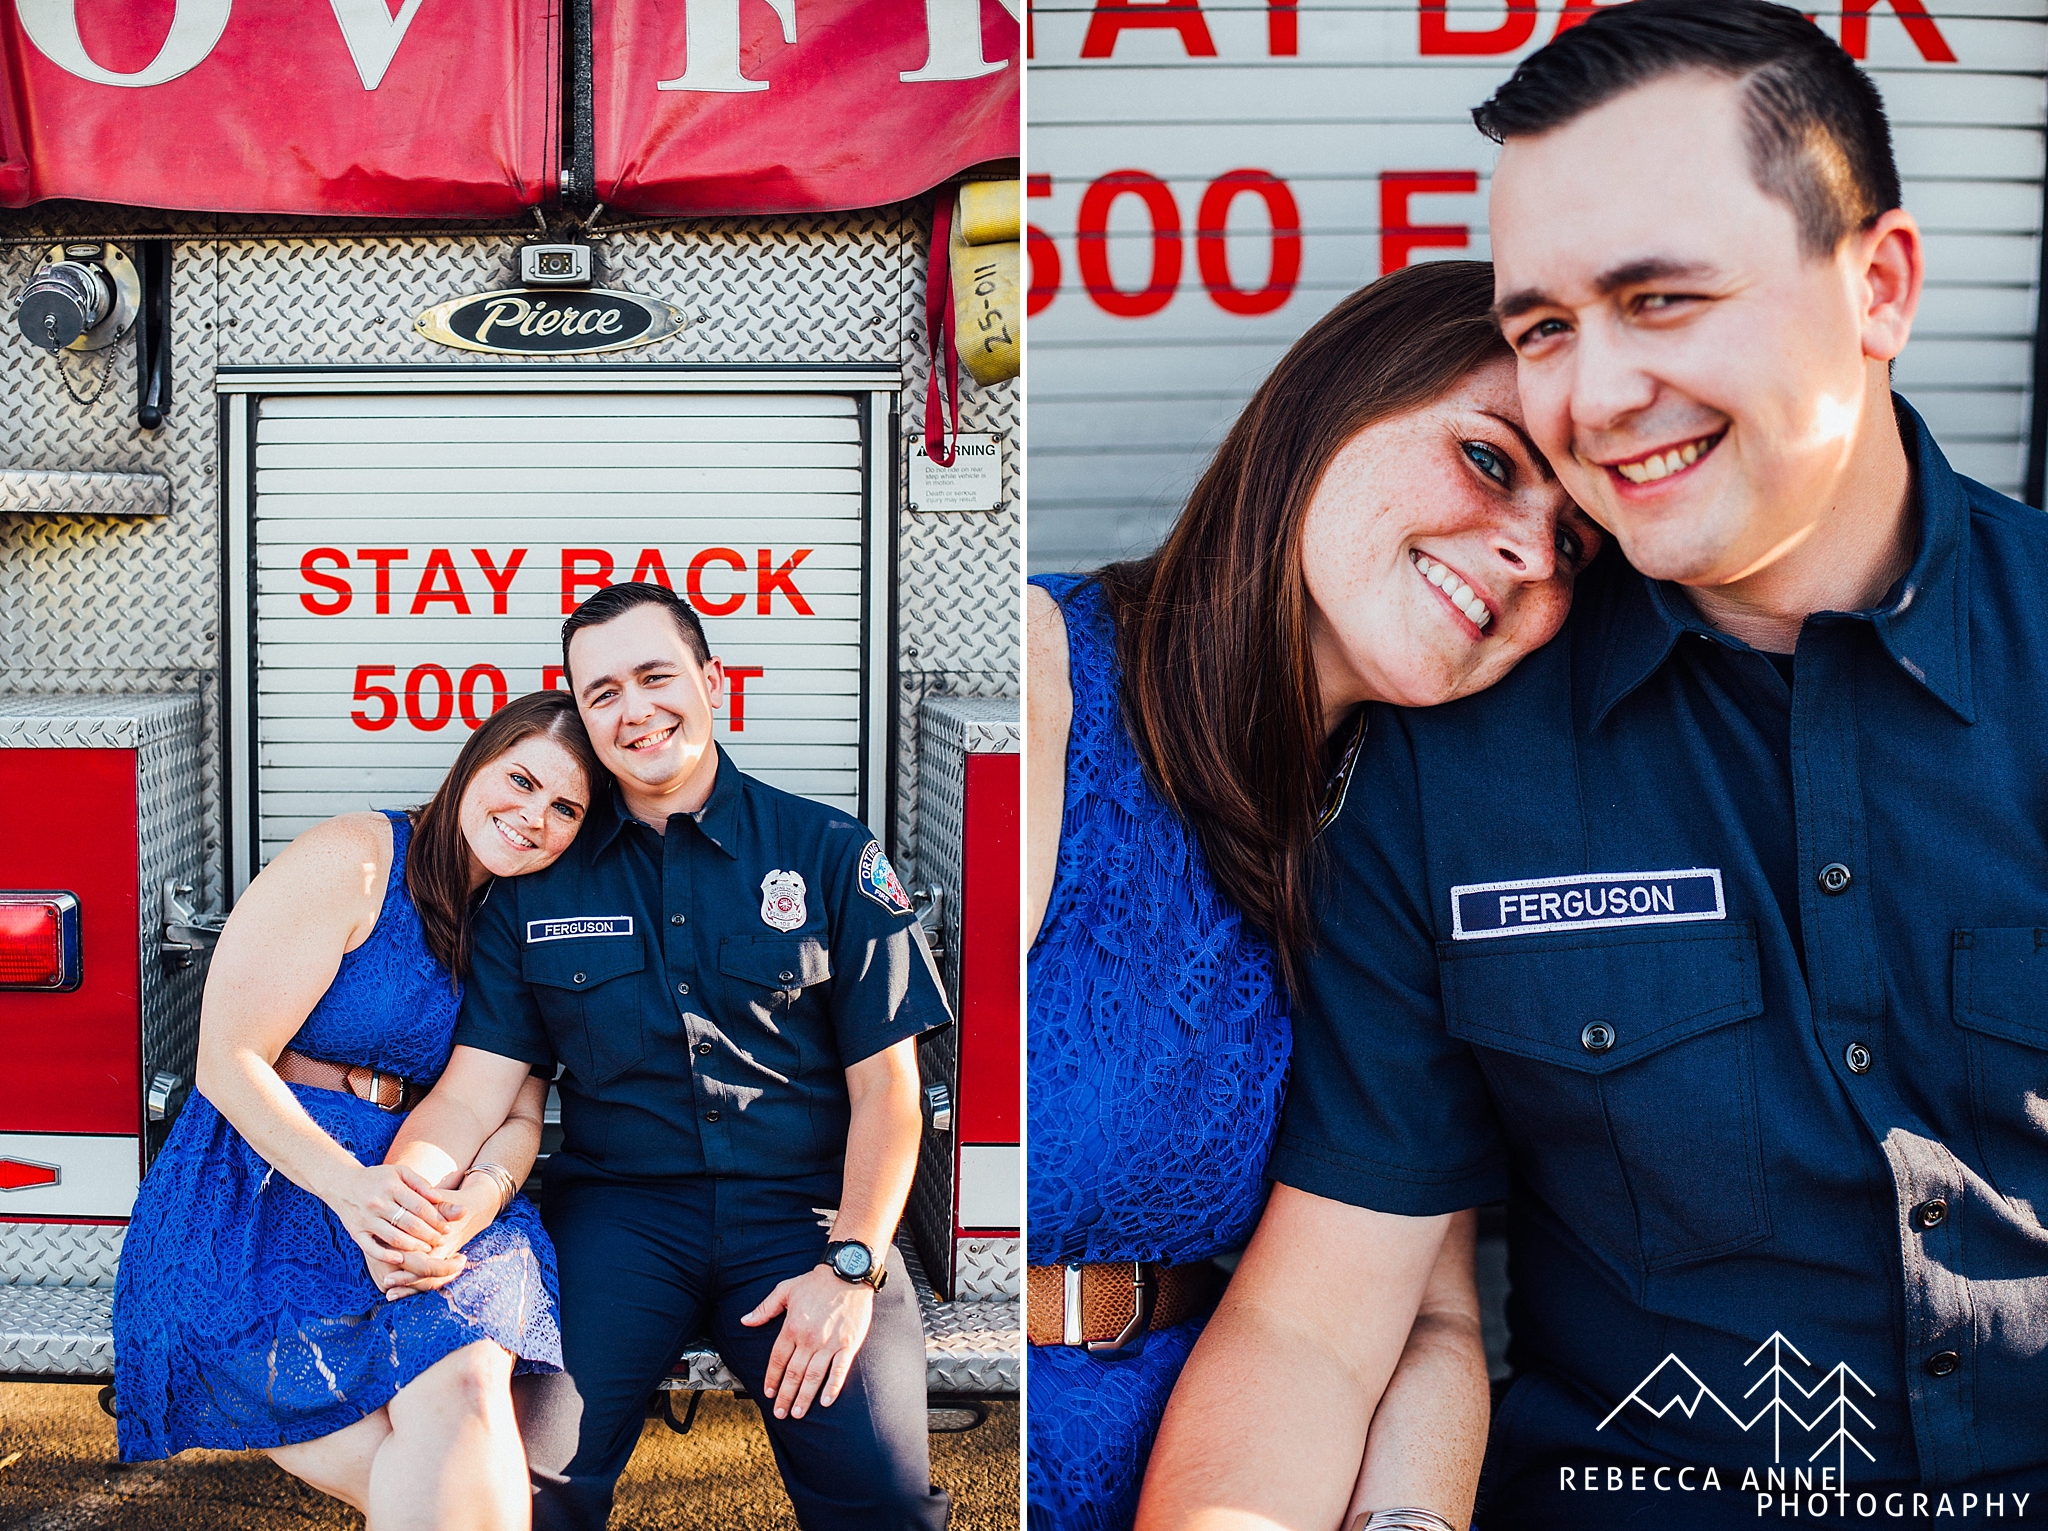 Orting Engagement,Orting Engagement Photos,Orting Engagement Photographer,Firefigher Engagement,Firehouse Engagement,Seattle Engagement Photographer,Seattle Engagement Photography,Seattle Engagement Photos,Washington Engagement Photographer,PNW Engagement Photographer,